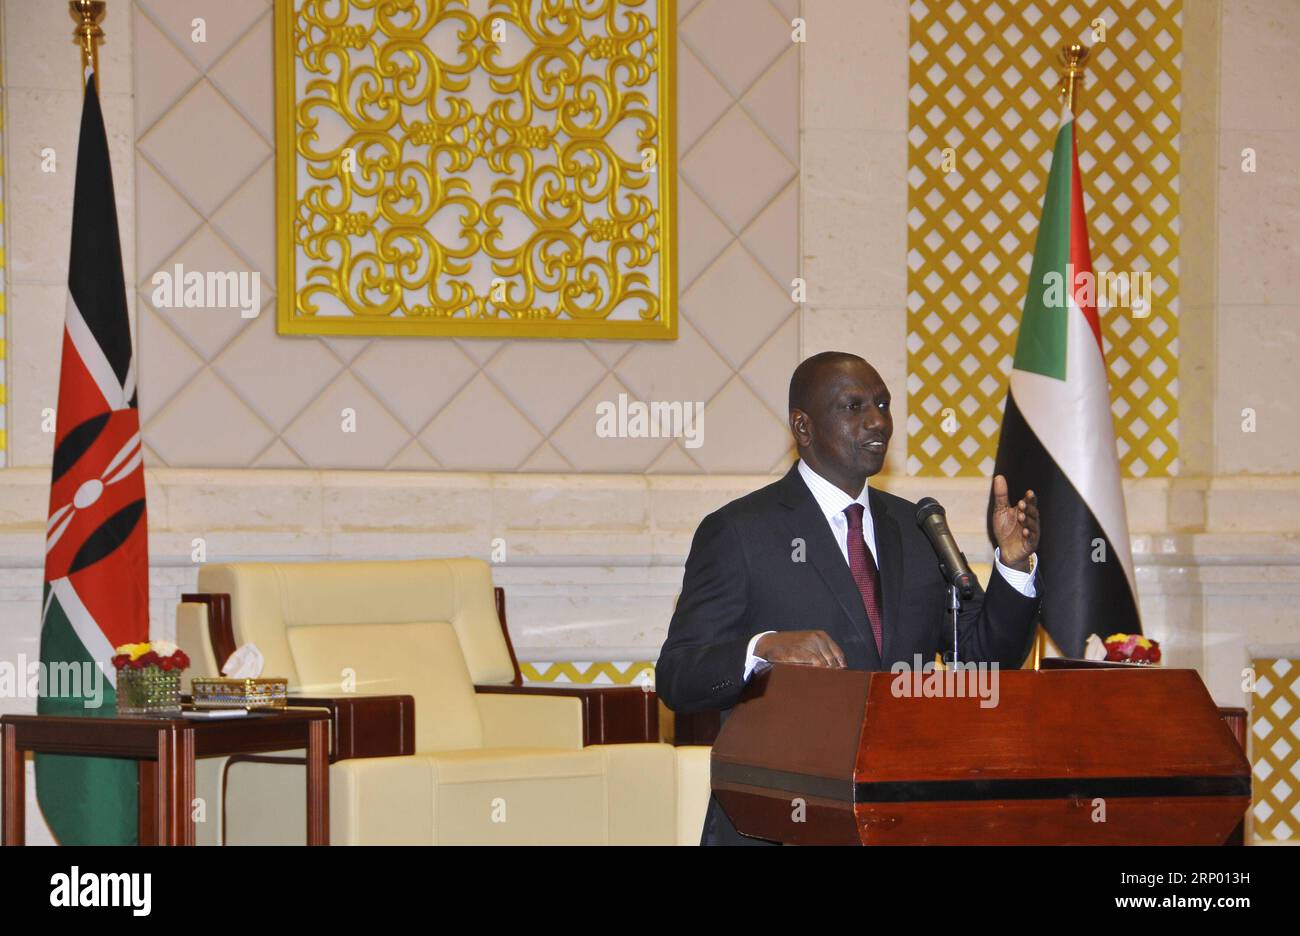 (180411) -- KHARTOUM, April 11, 2018 -- Kenyan Deputy President William Ruto speaks at a joint press conference with Sudan s First Vice-President Bakri Hassan Saleh (not seen in the picture) in Khartoum, Sudan, April 11, 2018. Sudan and Kenya on Wednesday reiterated their commitment to working together to resolve Africa s security issues, particularly in South Sudan. The announcement came in a communique during the joint talks chaired by Sudan s First Vice-President Bakri Hassan Saleh and visiting Kenyan Deputy President William Ruto. ) SUDAN-KHARTOUM-KENYA-VISIT-JOINT CONFERENCE MohamedxKhidi Stock Photo